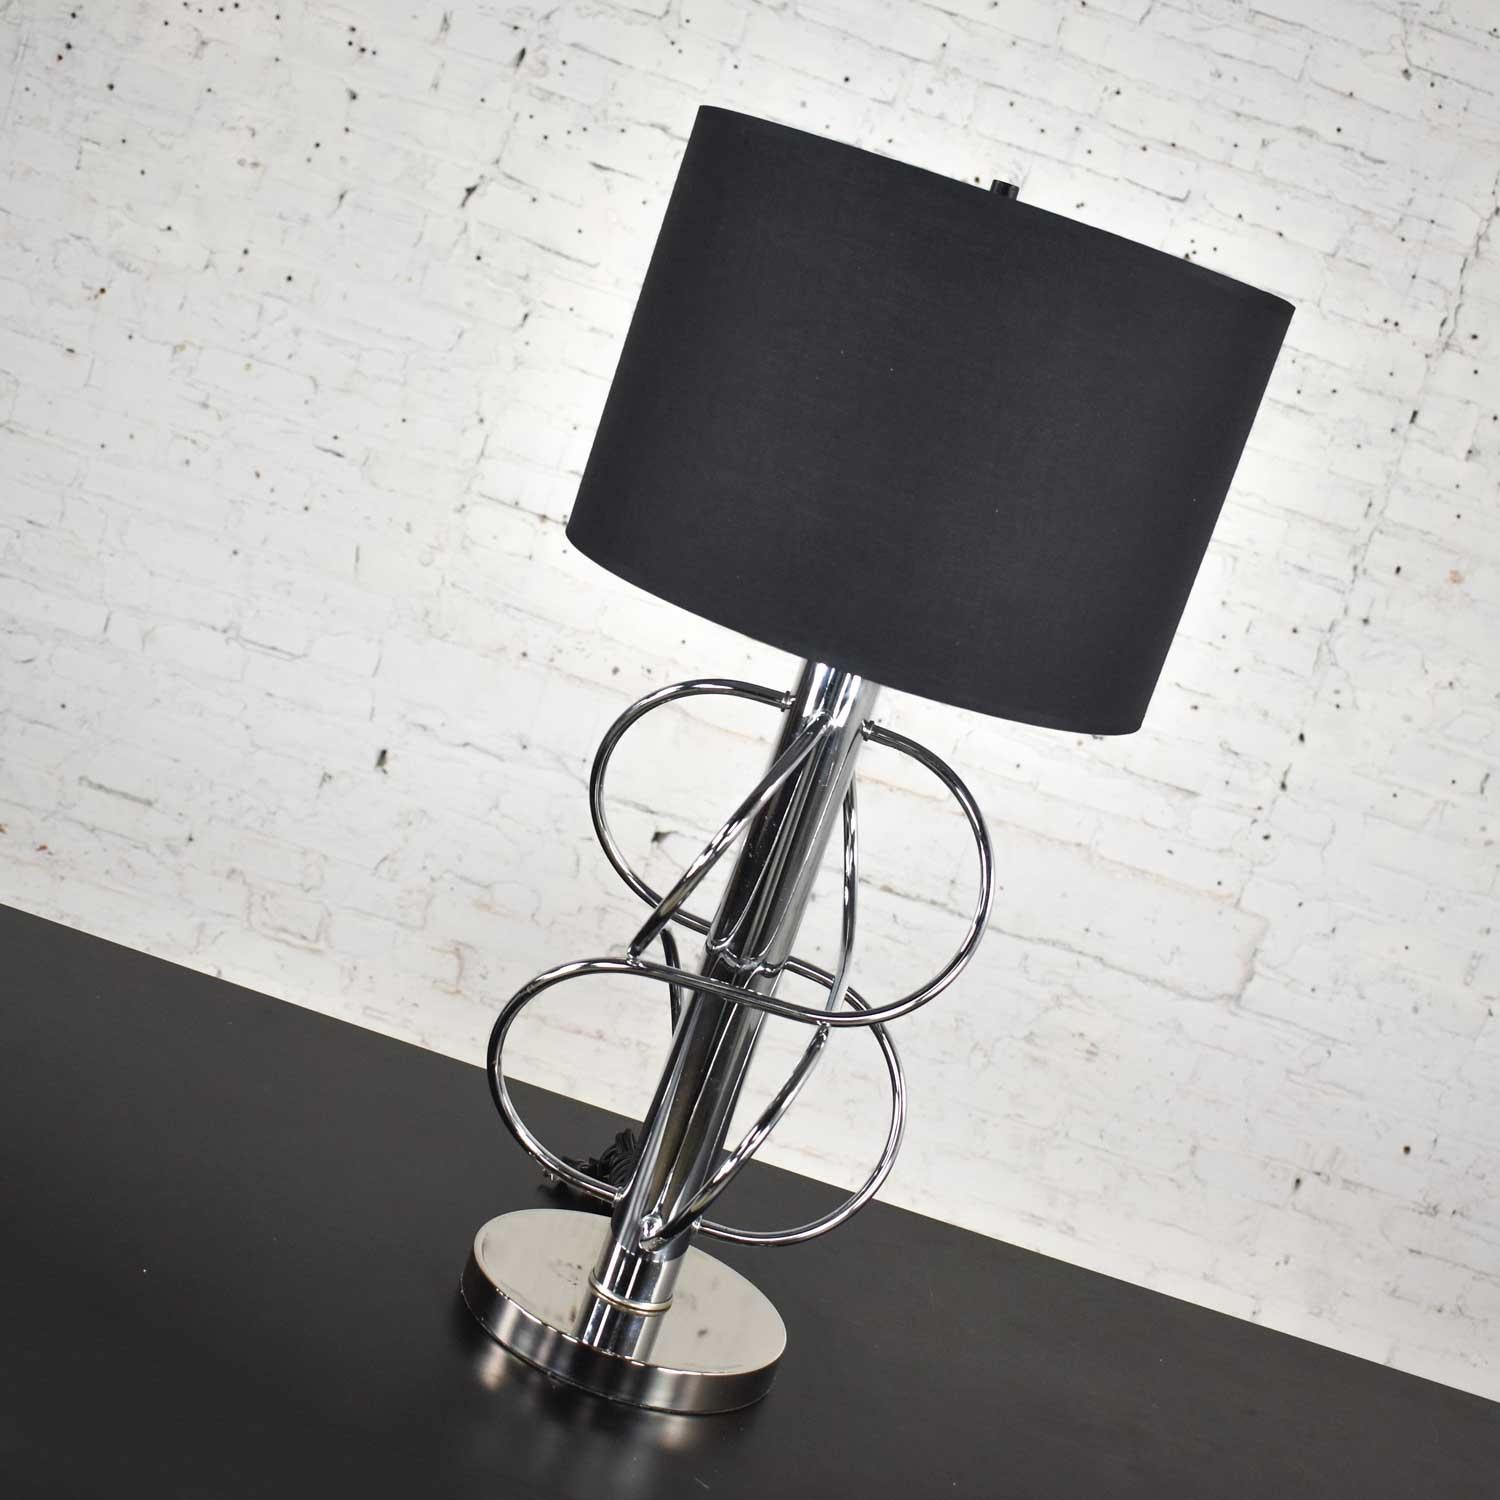 20th Century Vintage Mid-Century Modern Polished Chrome Table Lamp New Black Drum Shade For Sale